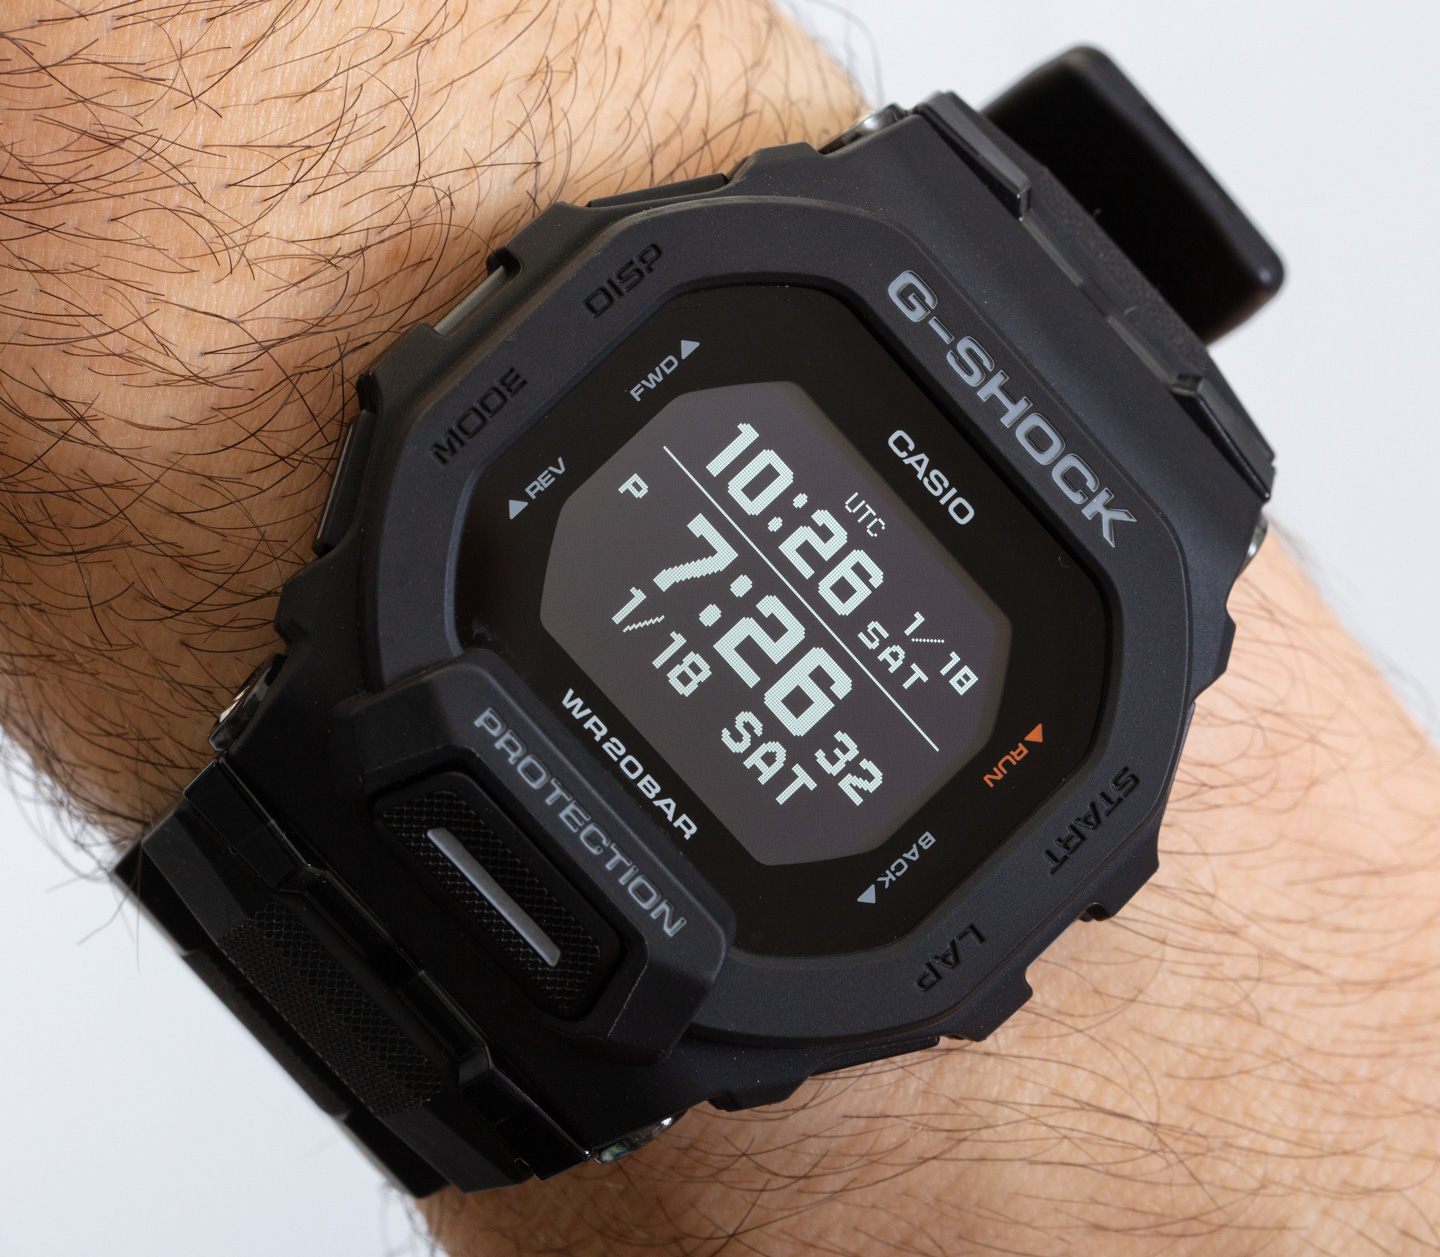 Watch Review: Casio GBD200 | MOVE G-Shock aBlogtoWatch MiP Bluetooth Entry-Level